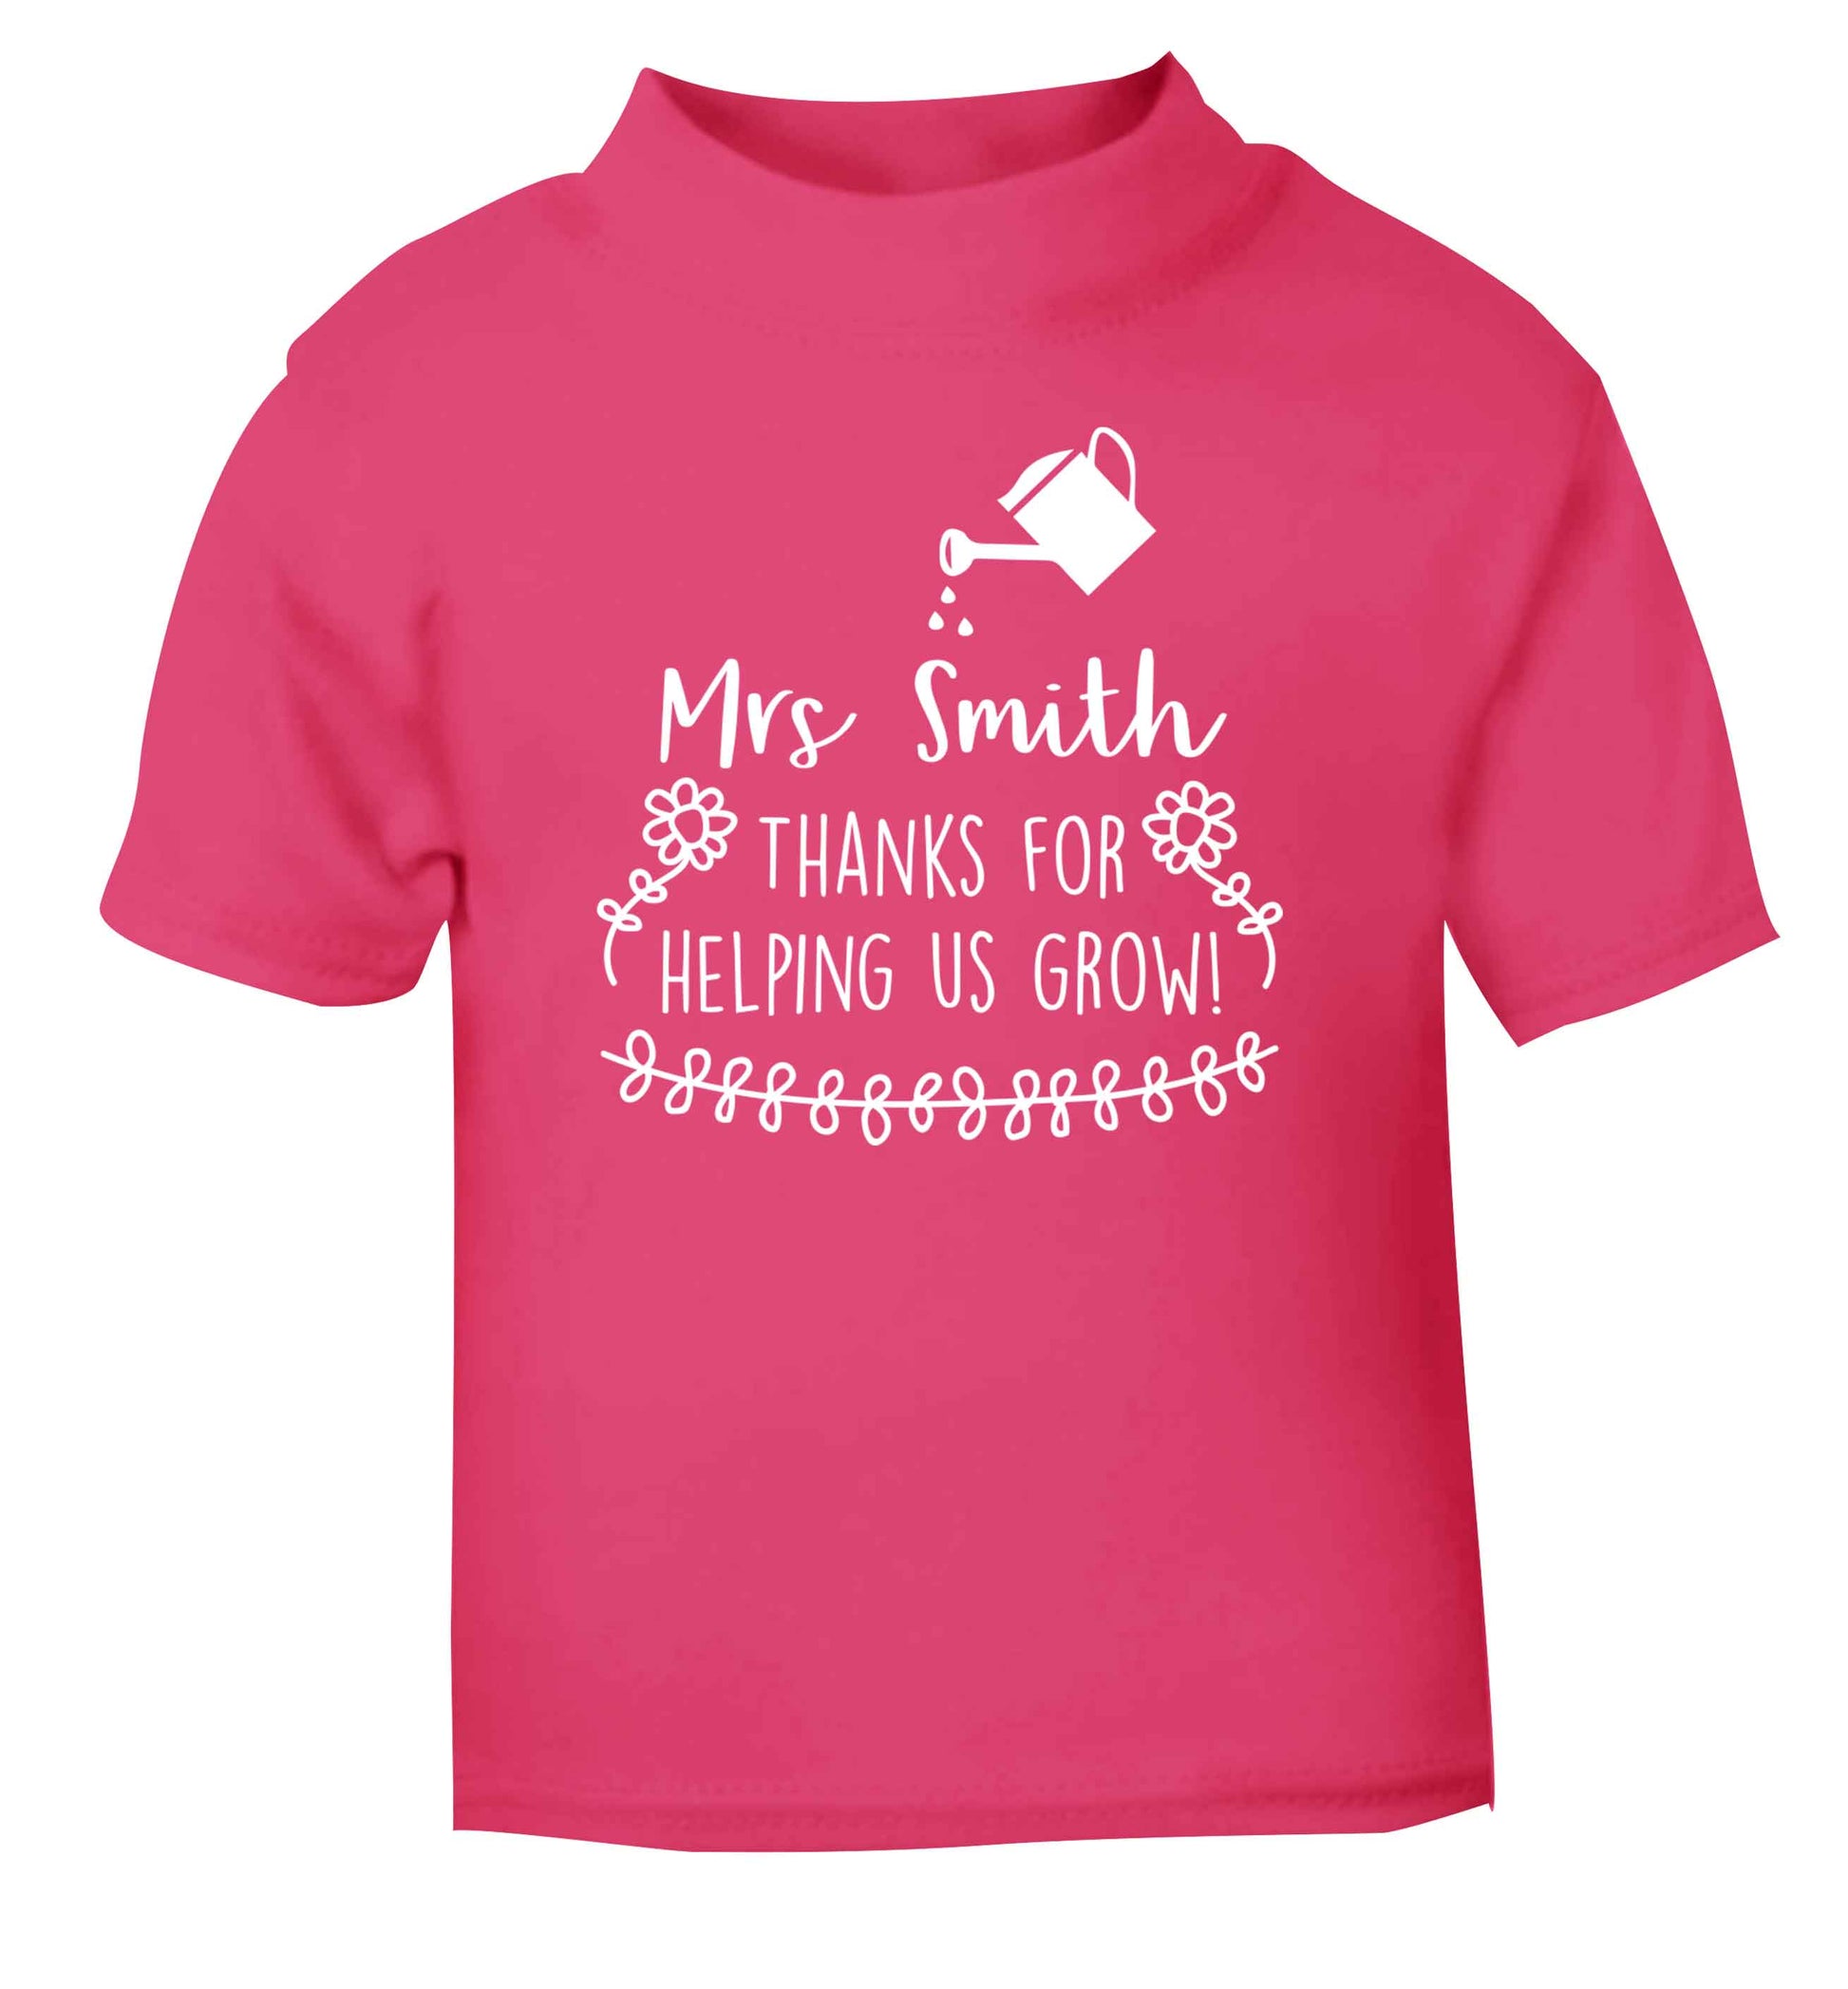 Personalised Mrs Smith thanks for helping us grow pink Baby Toddler Tshirt 2 Years